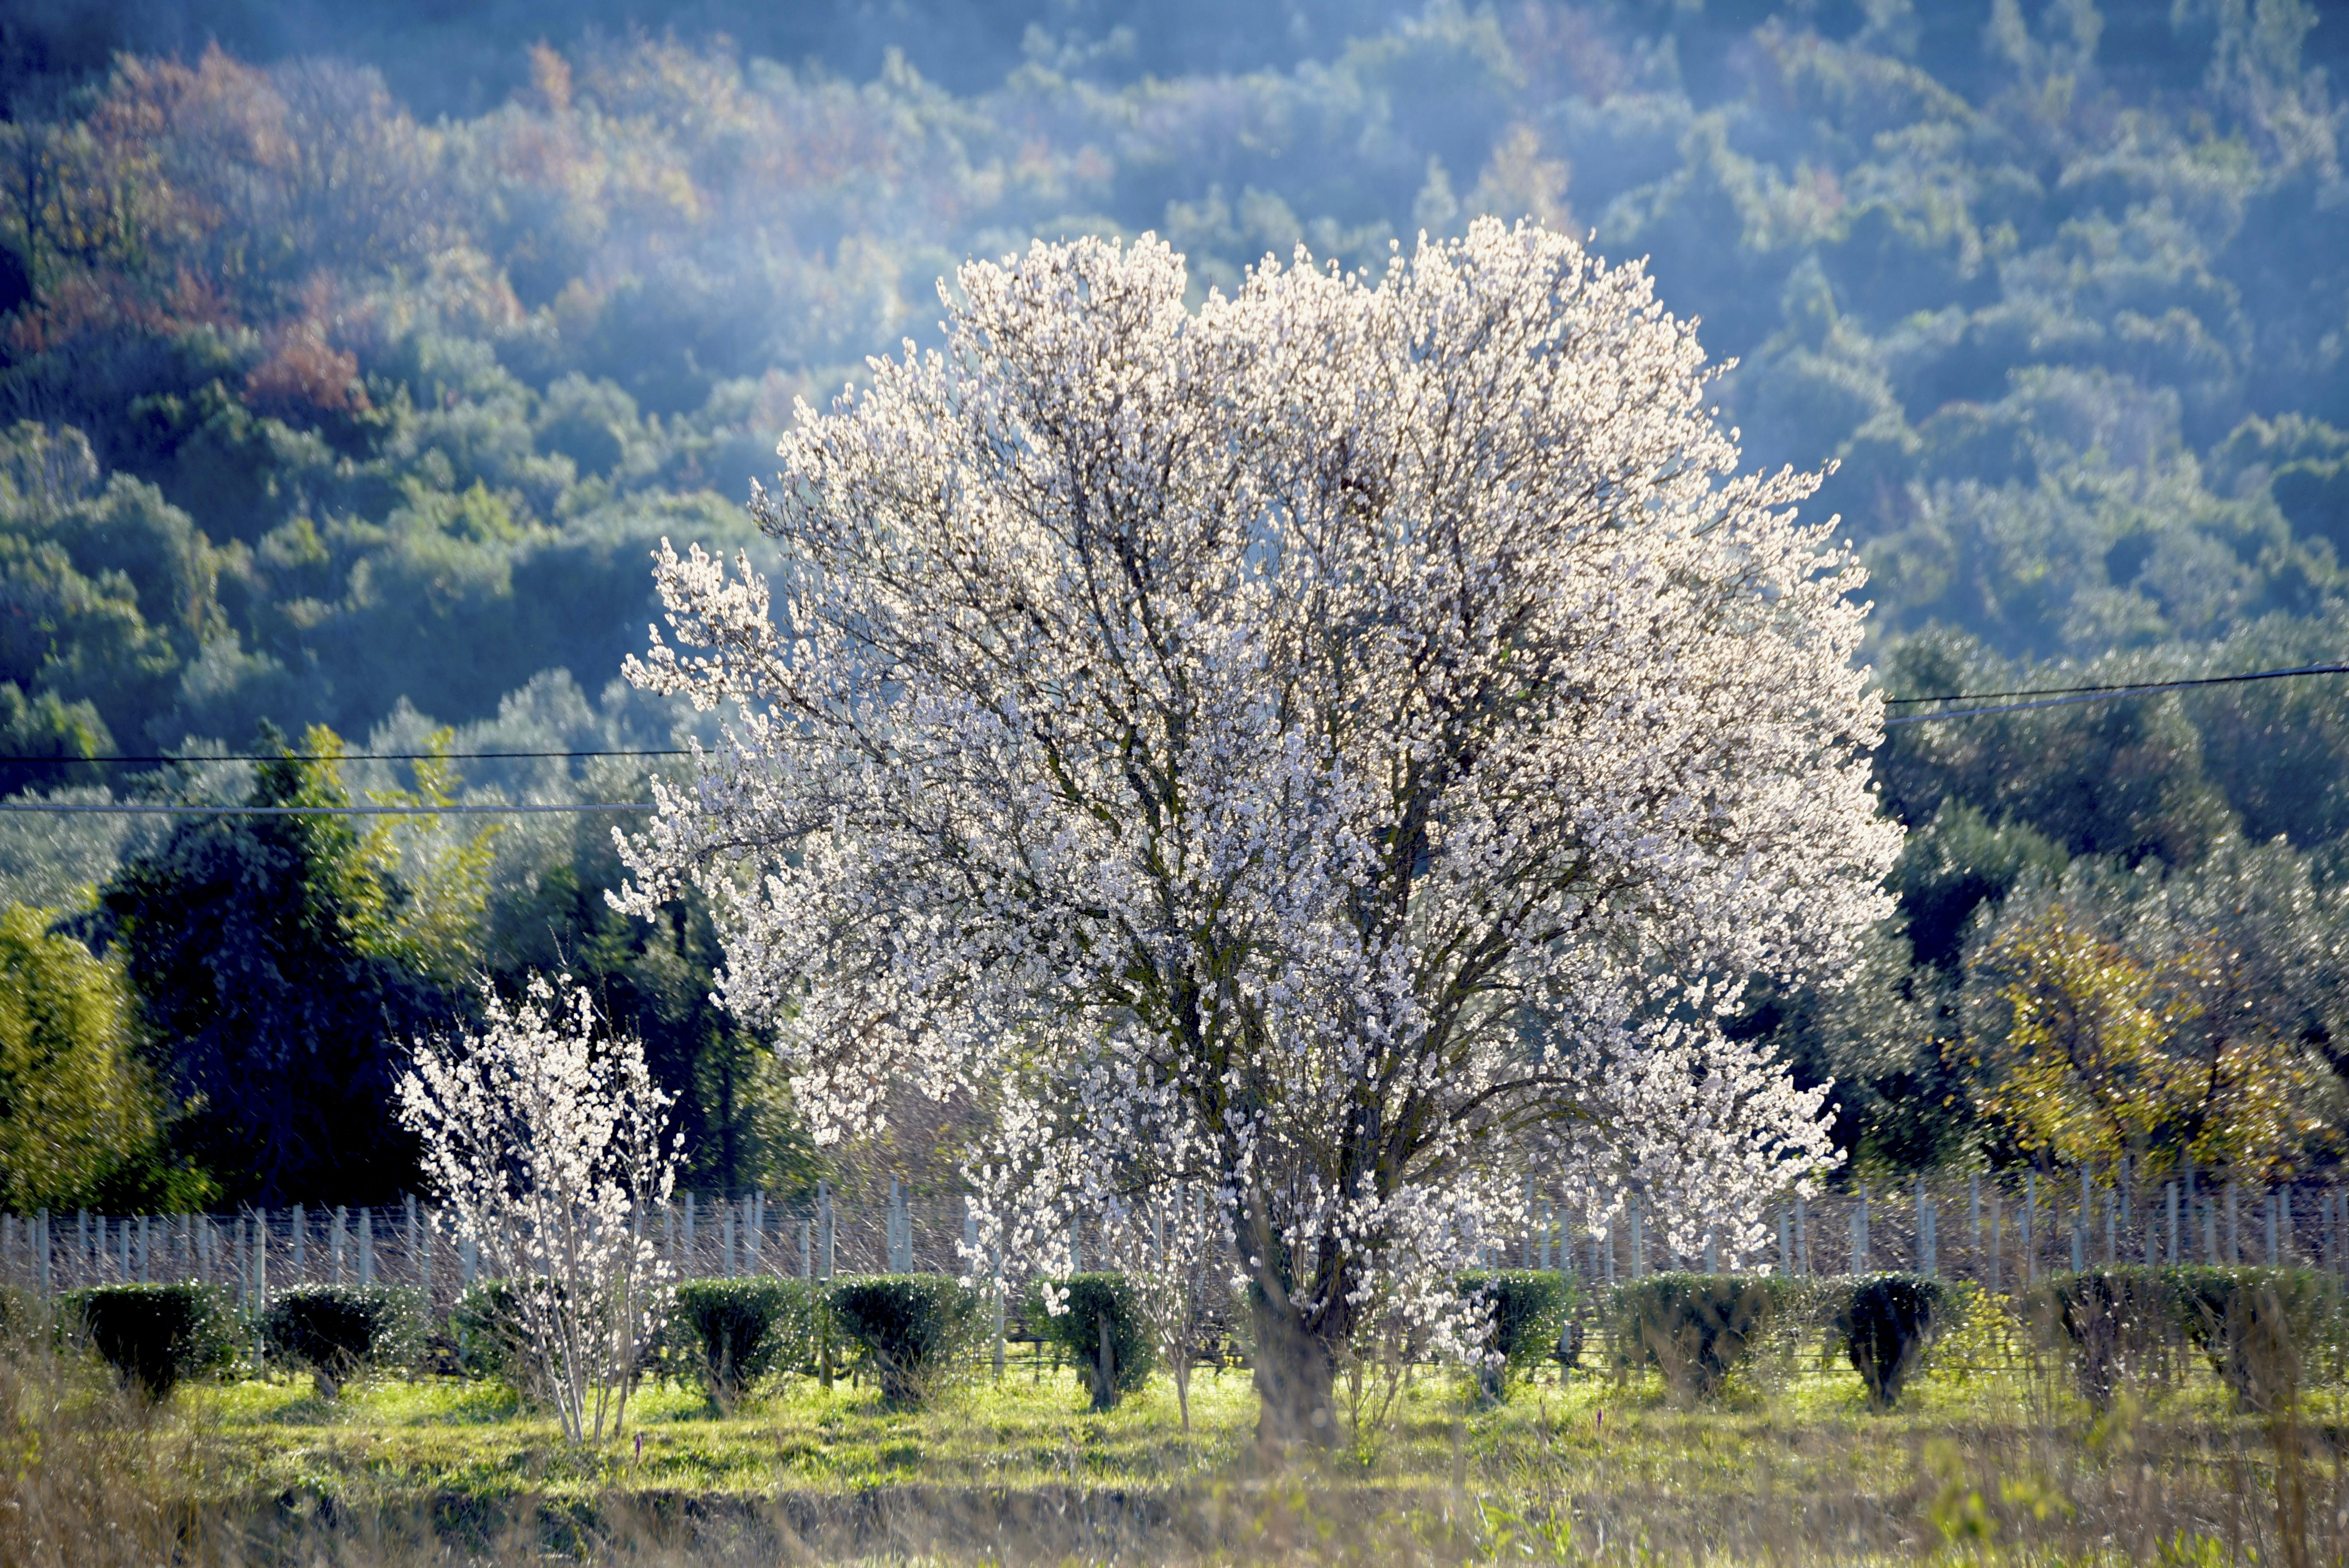 The almond trees are the first to show their beauty.